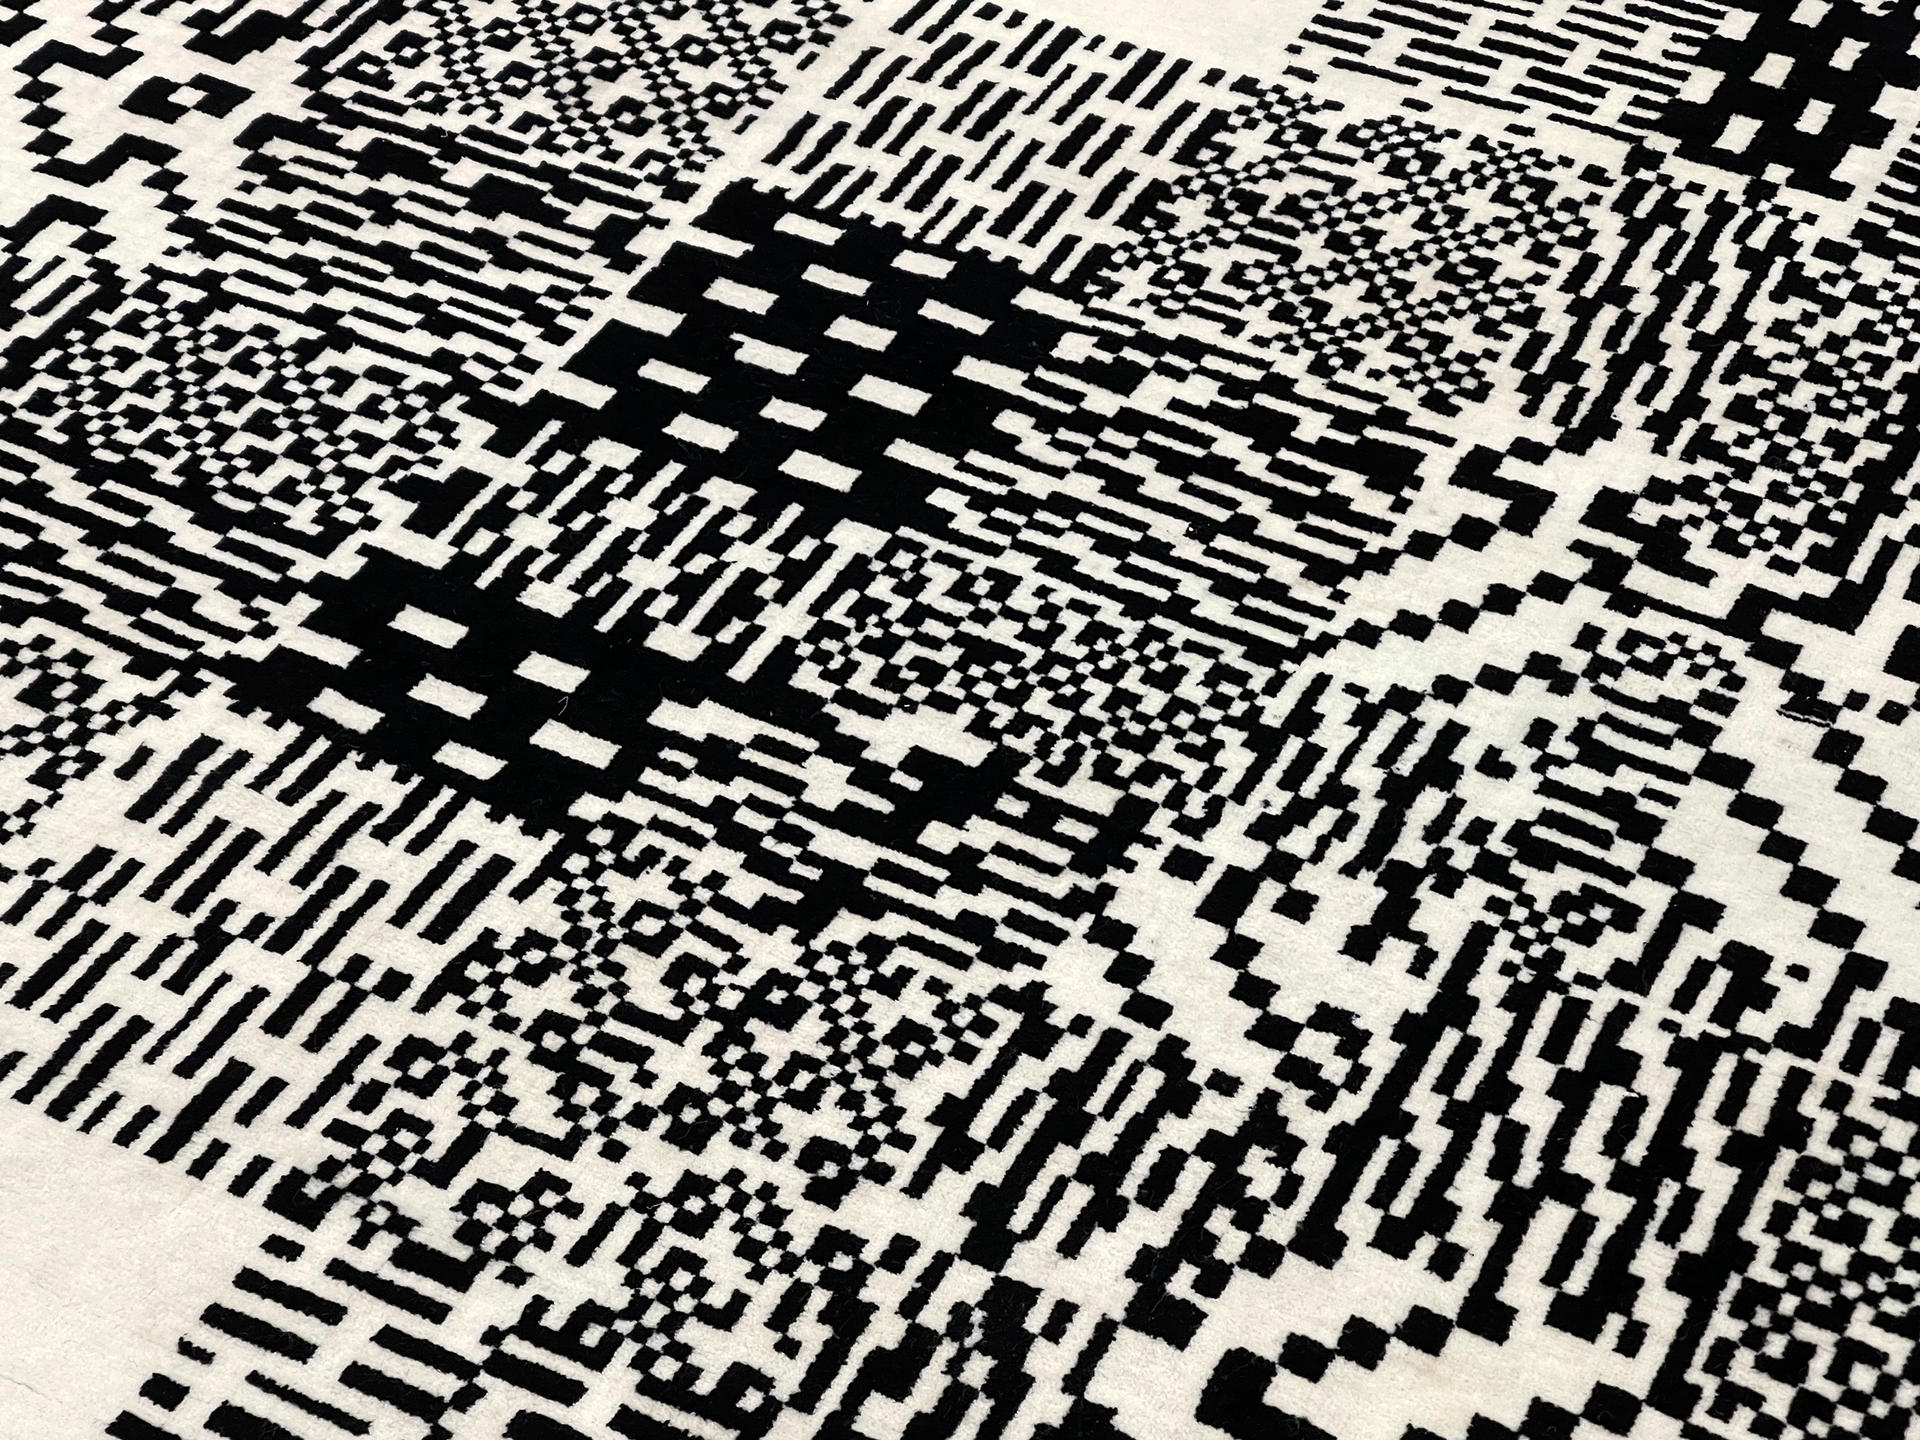 Detail documentation photograph of hand-knotted wool rug. The rug is covered in a semi-repetitive black and white patterned square image.